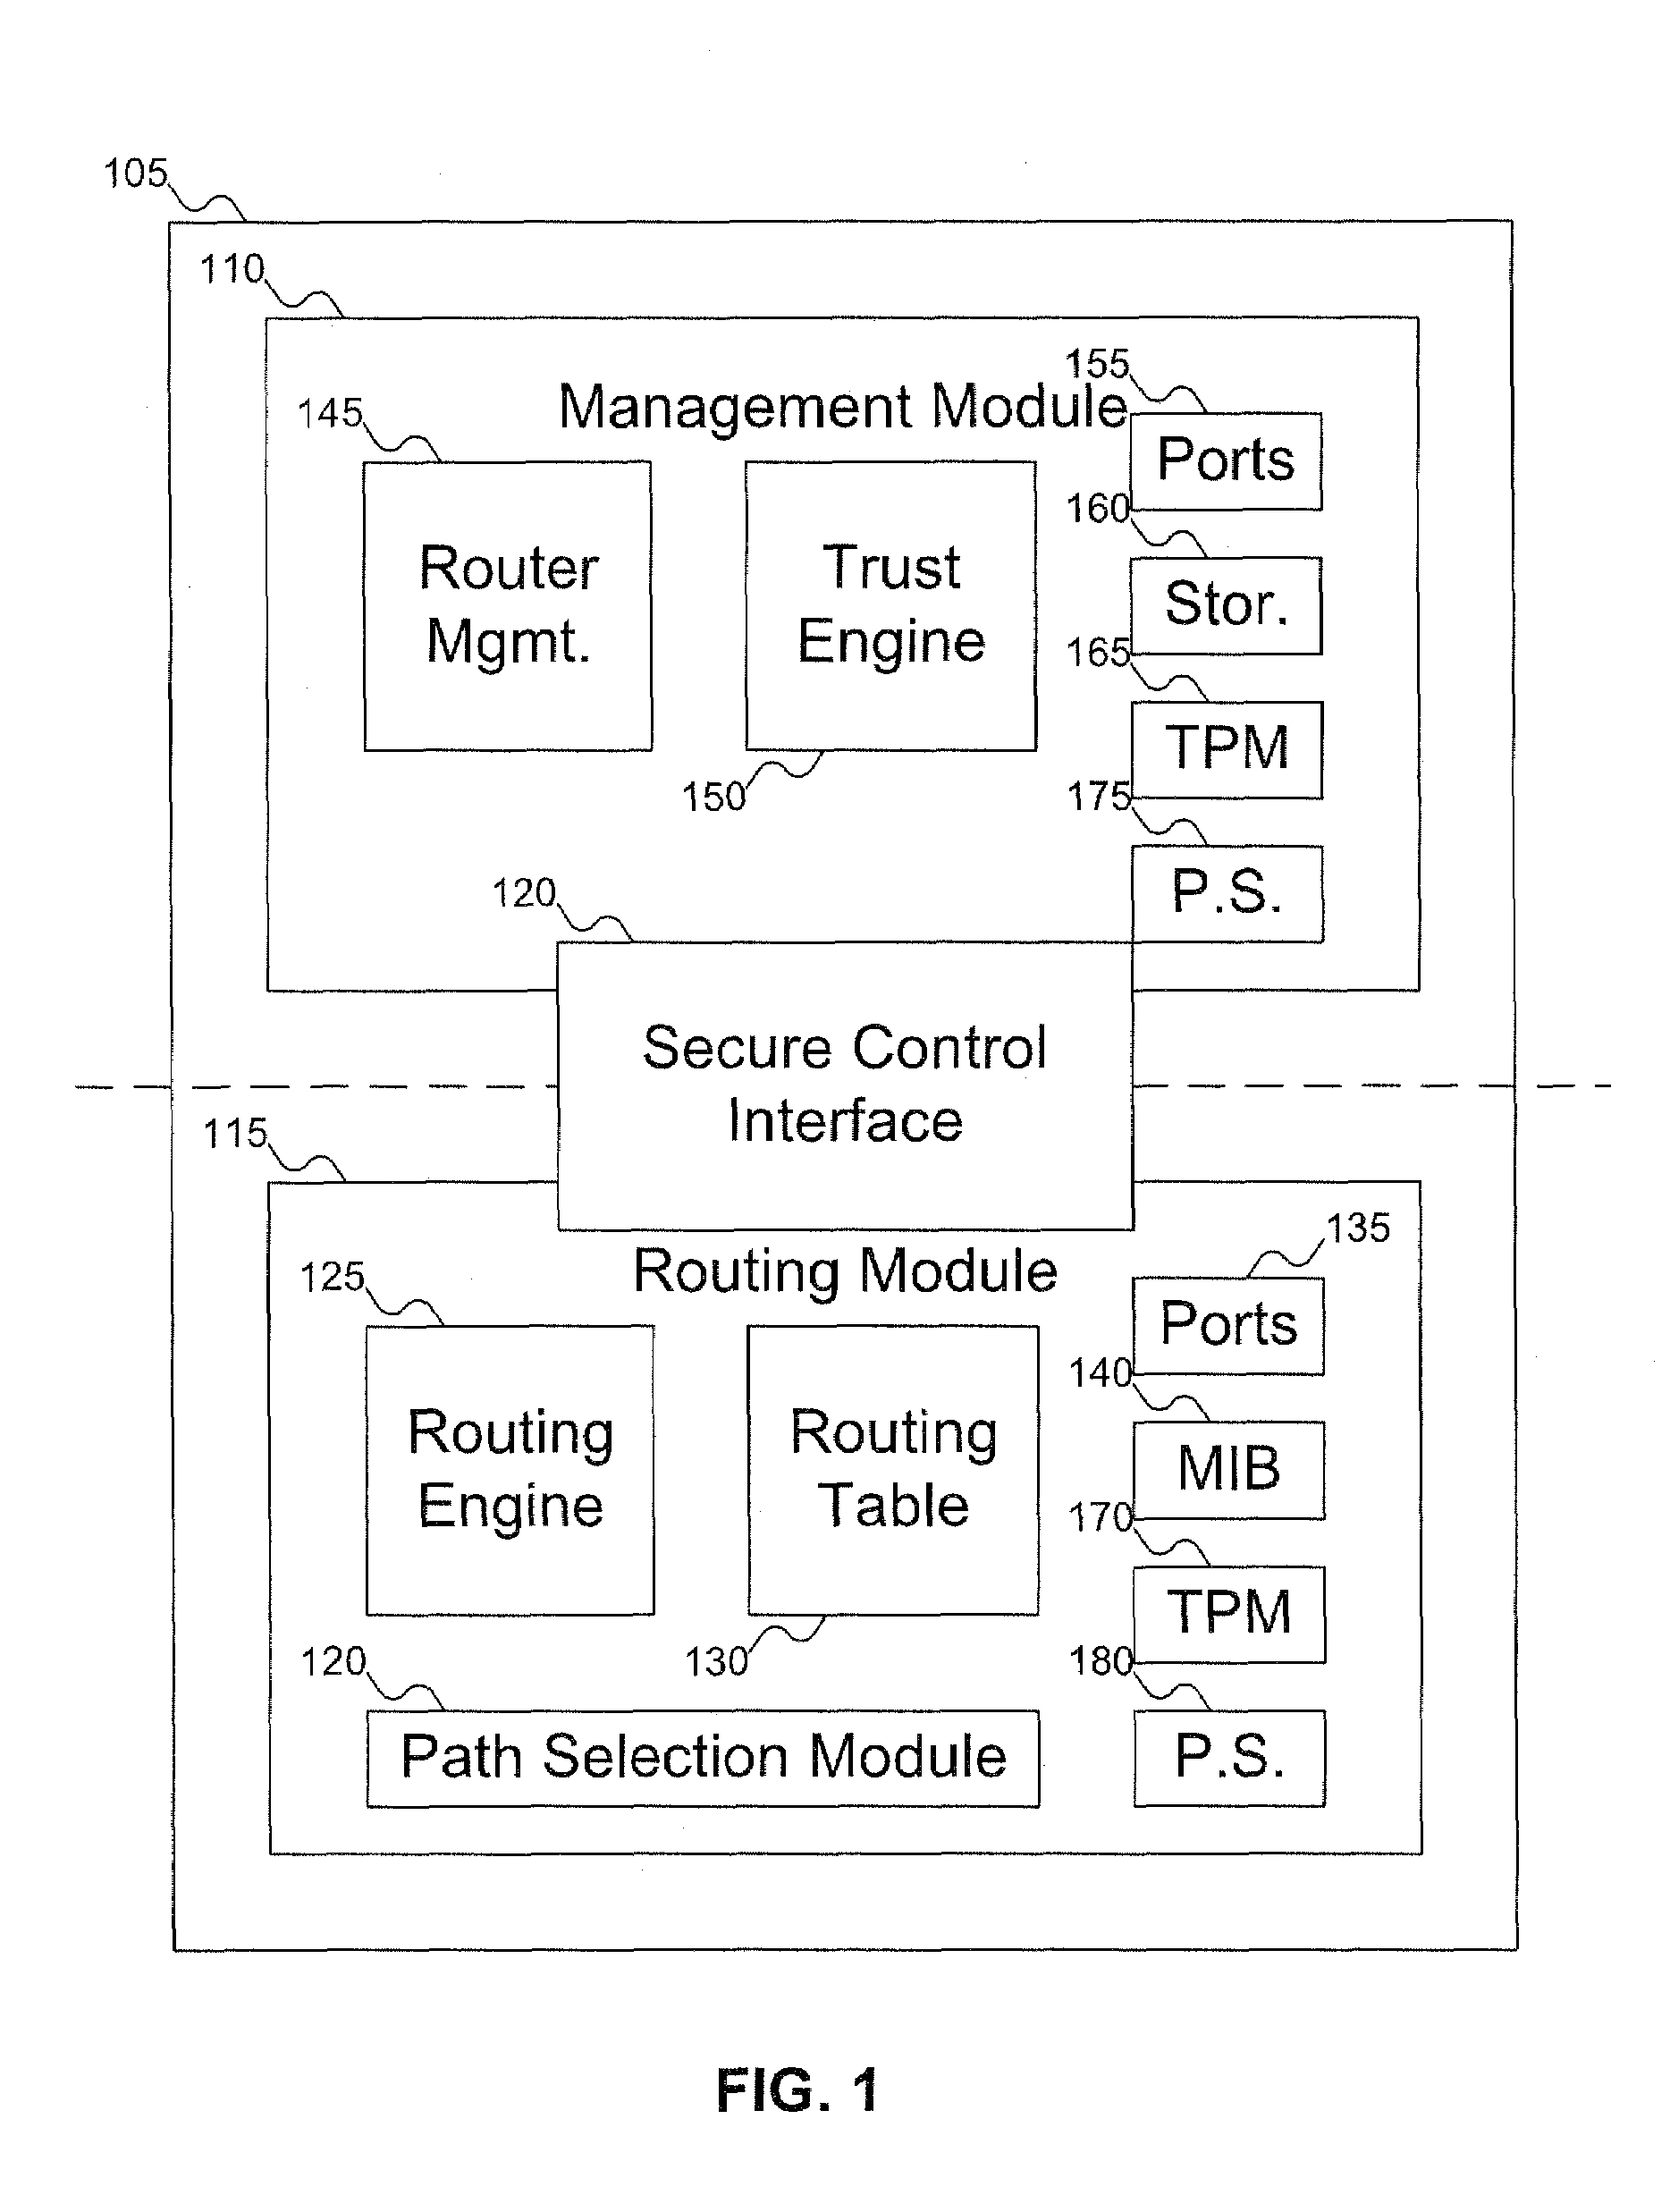 Method and apparatus to establish routes based on the trust scores of routers within an IP routing domain